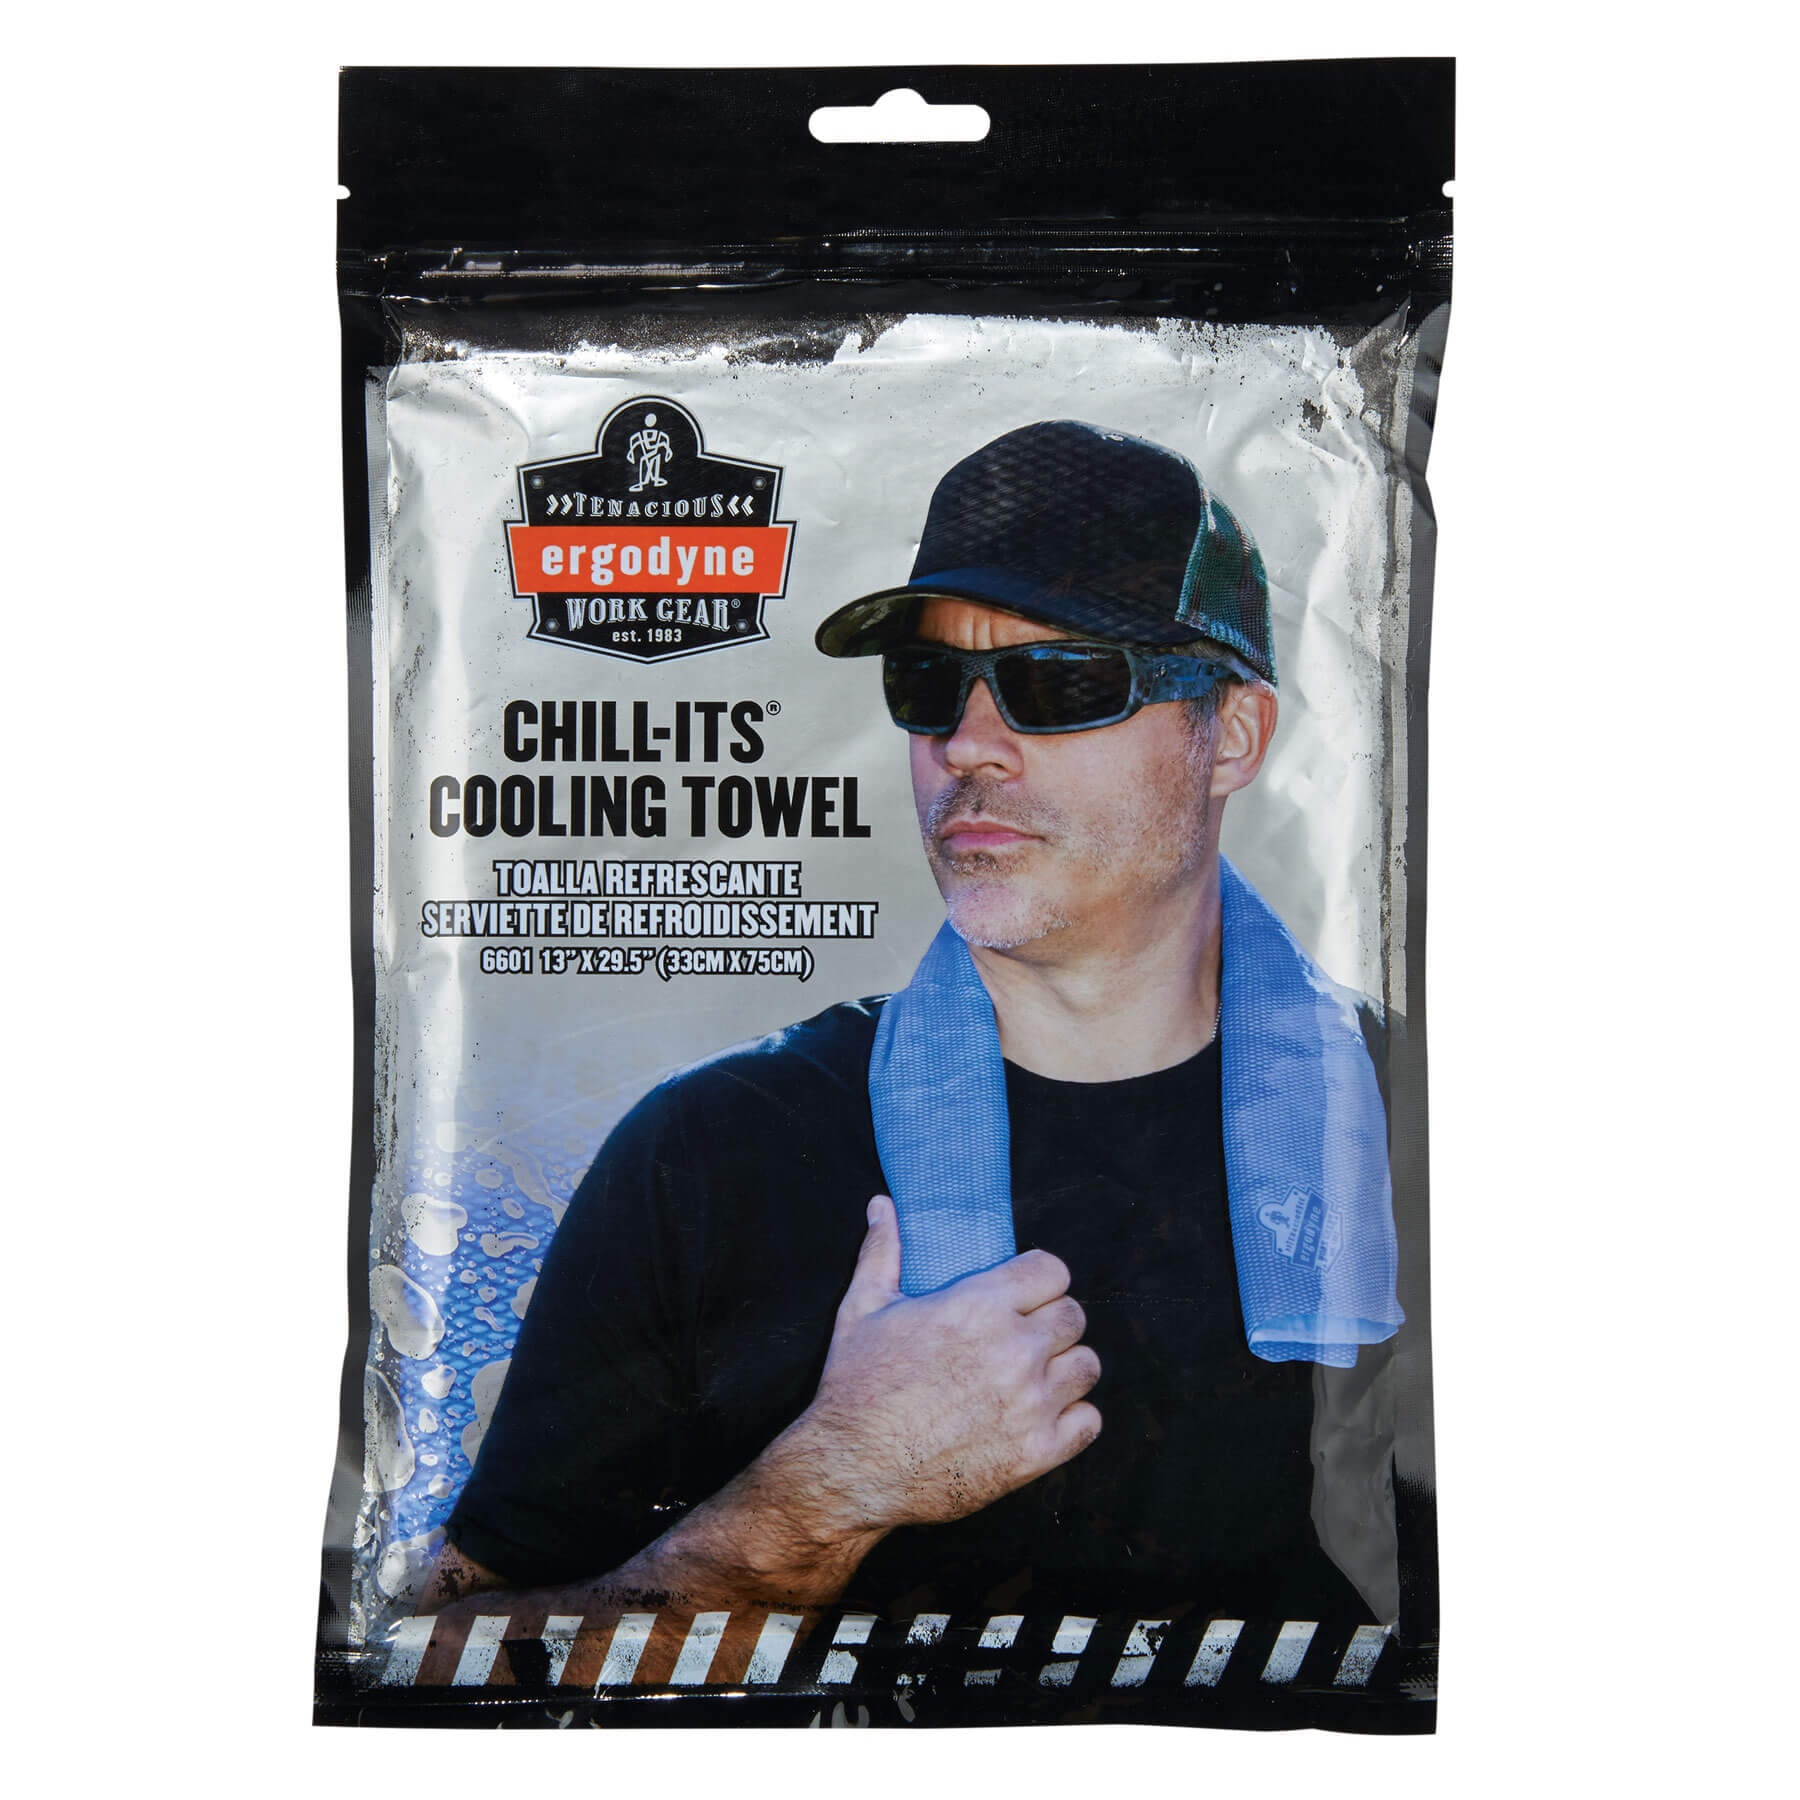 Ergodyne Chill-Its Evaporative Cooling Towel 3 from Columbia Safety